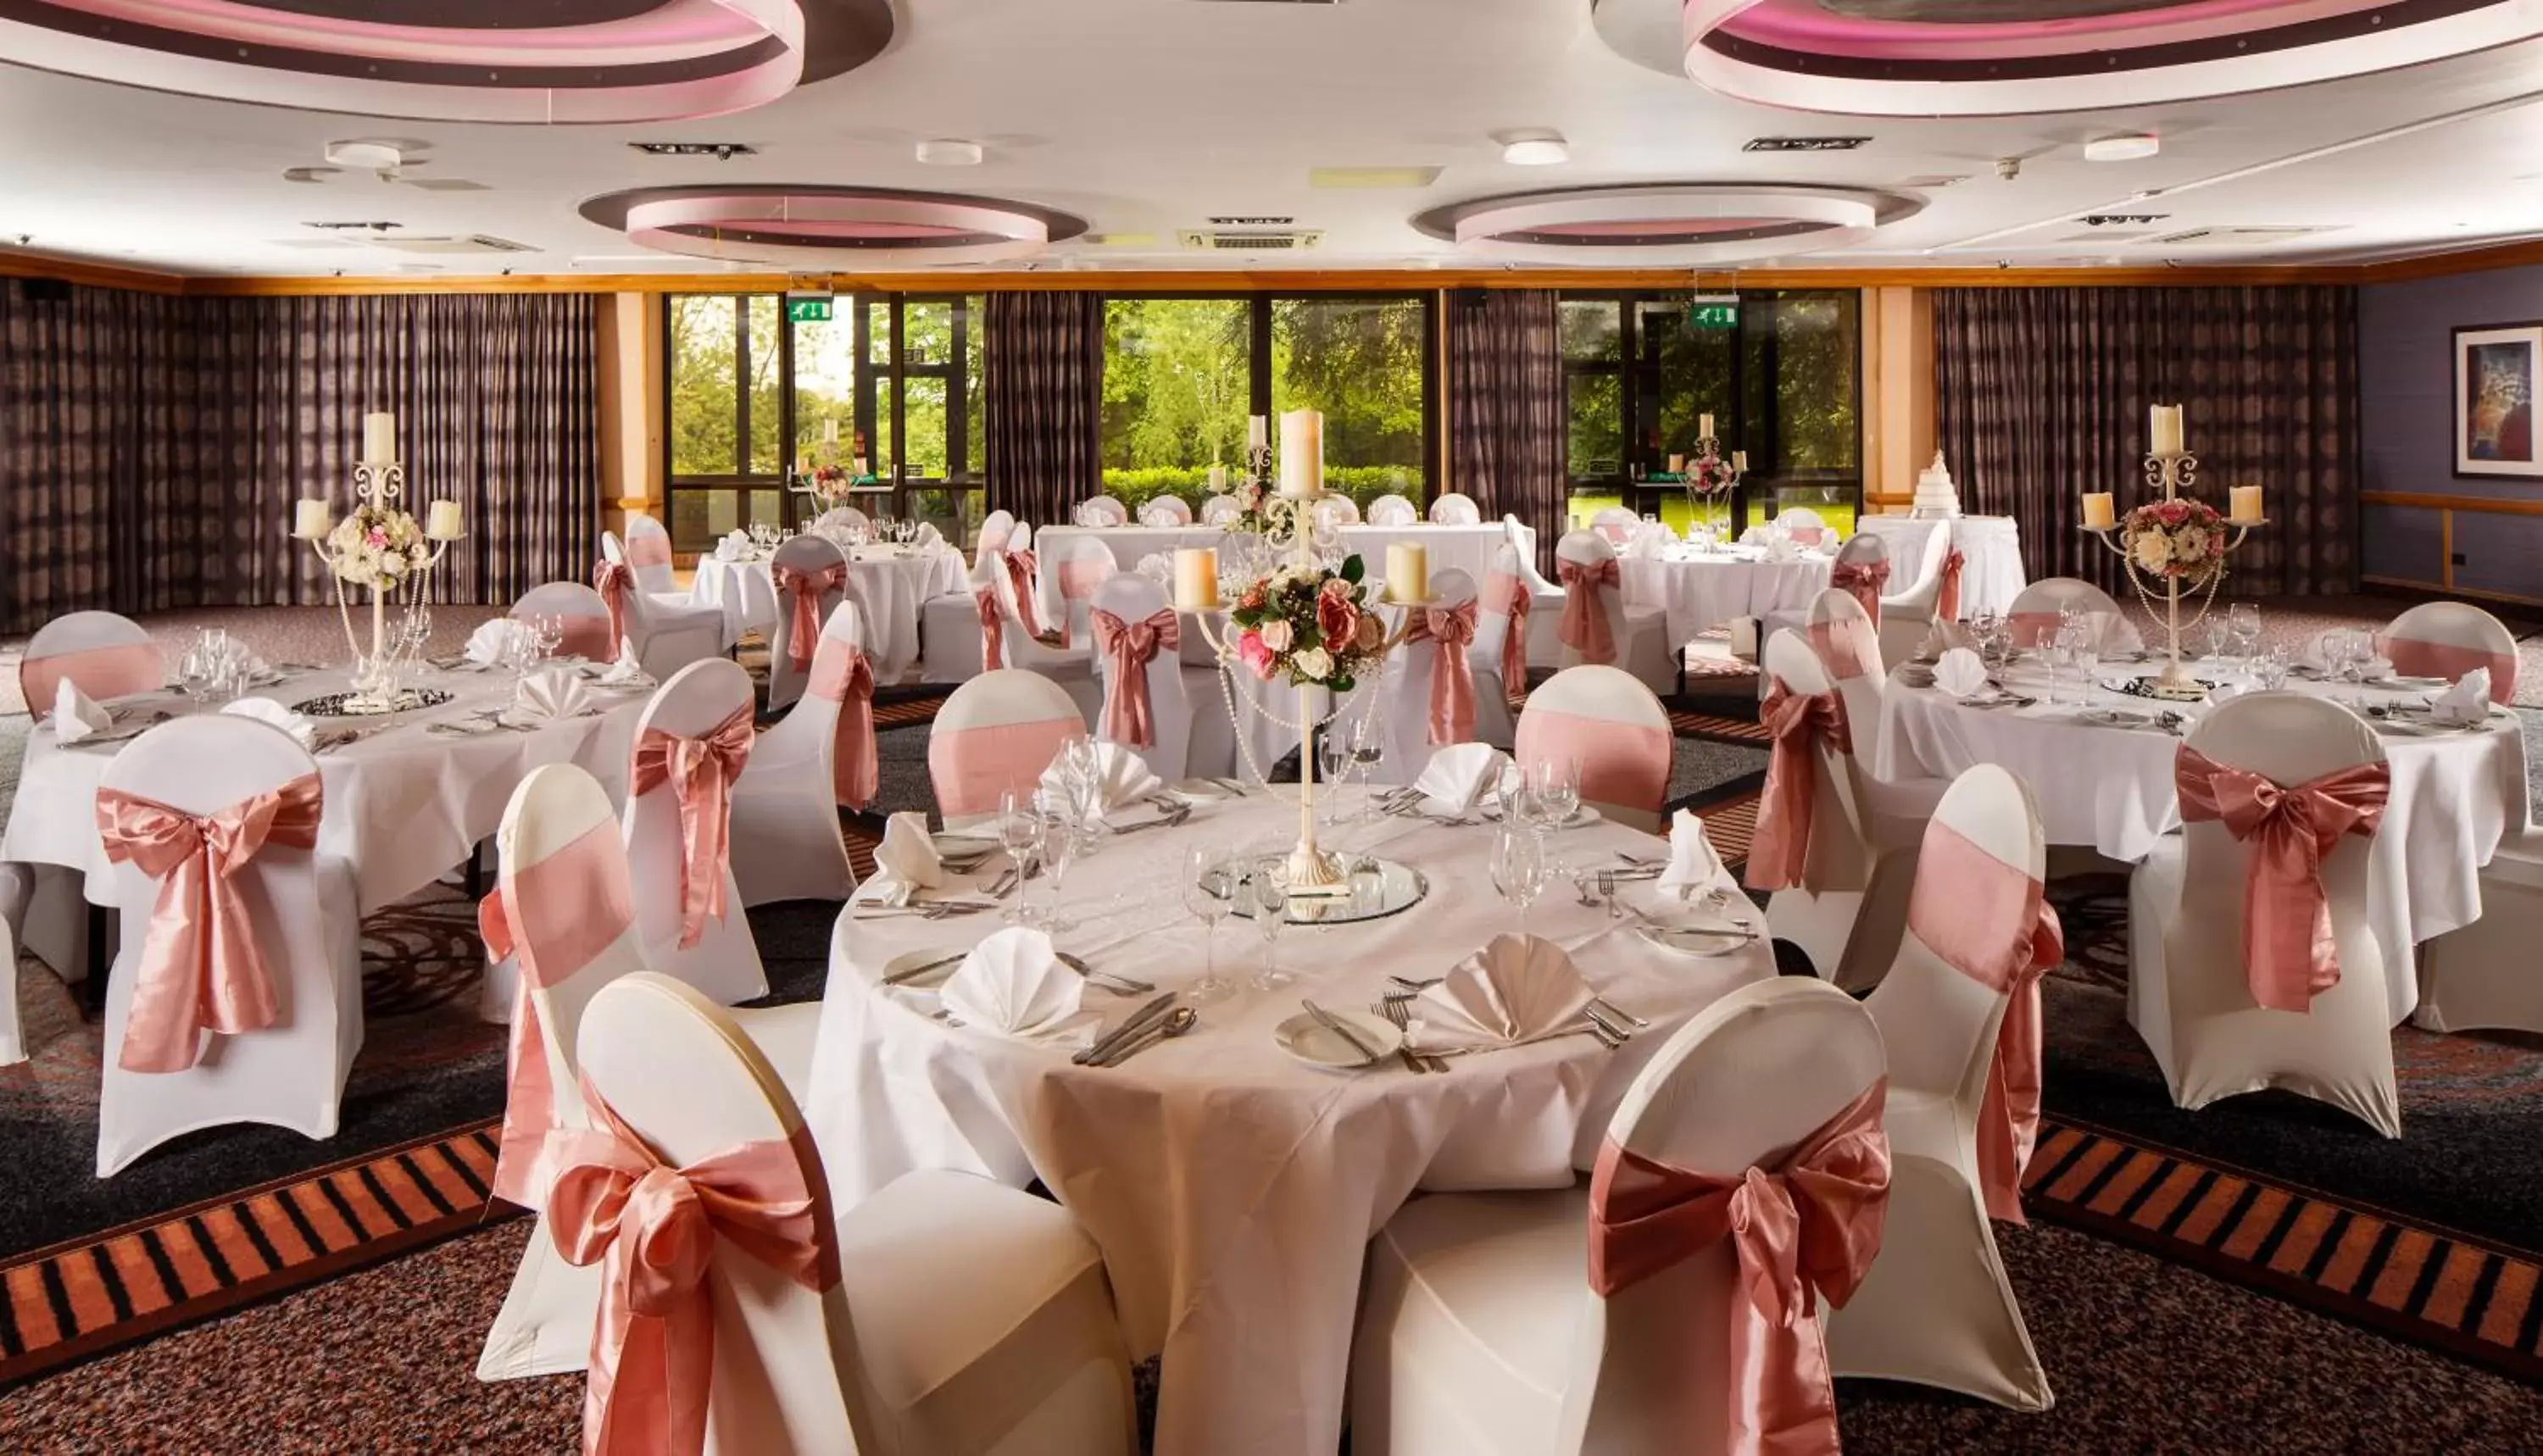 Area and facilities, Banquet Facilities in Mercure Hull Grange Park Hotel